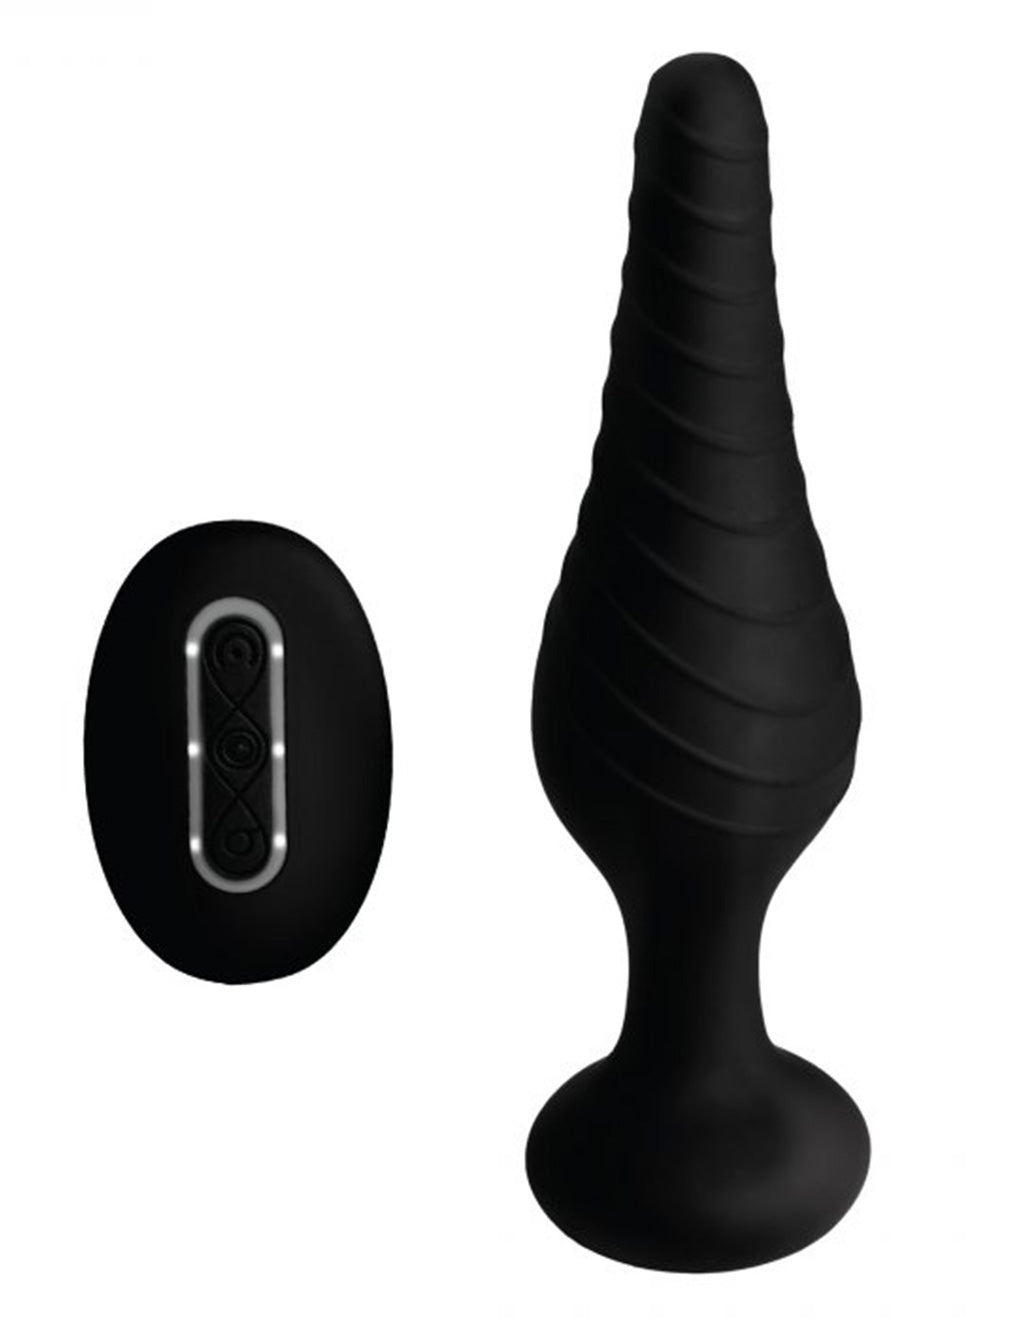 Under Control Vibrating Anal Plug with Remote Sex Toys at Hustler Hollywood picture image